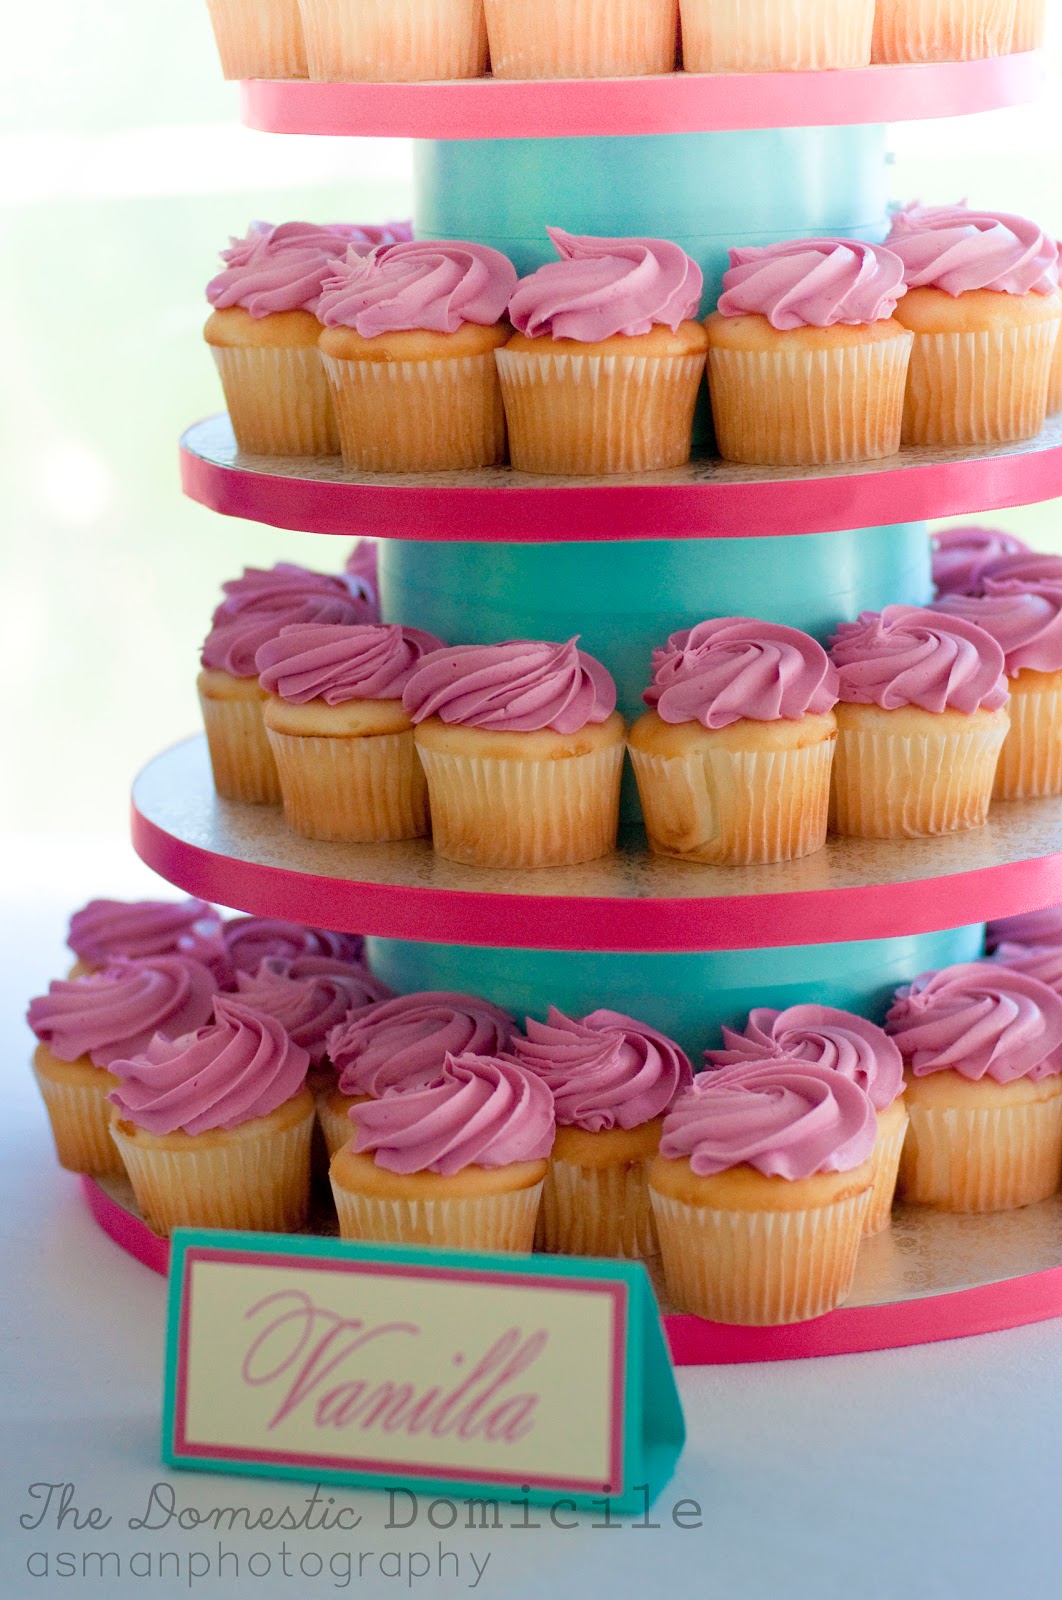 DIY Wedding Revisited: Cupcake Tower The Domestic Domicile